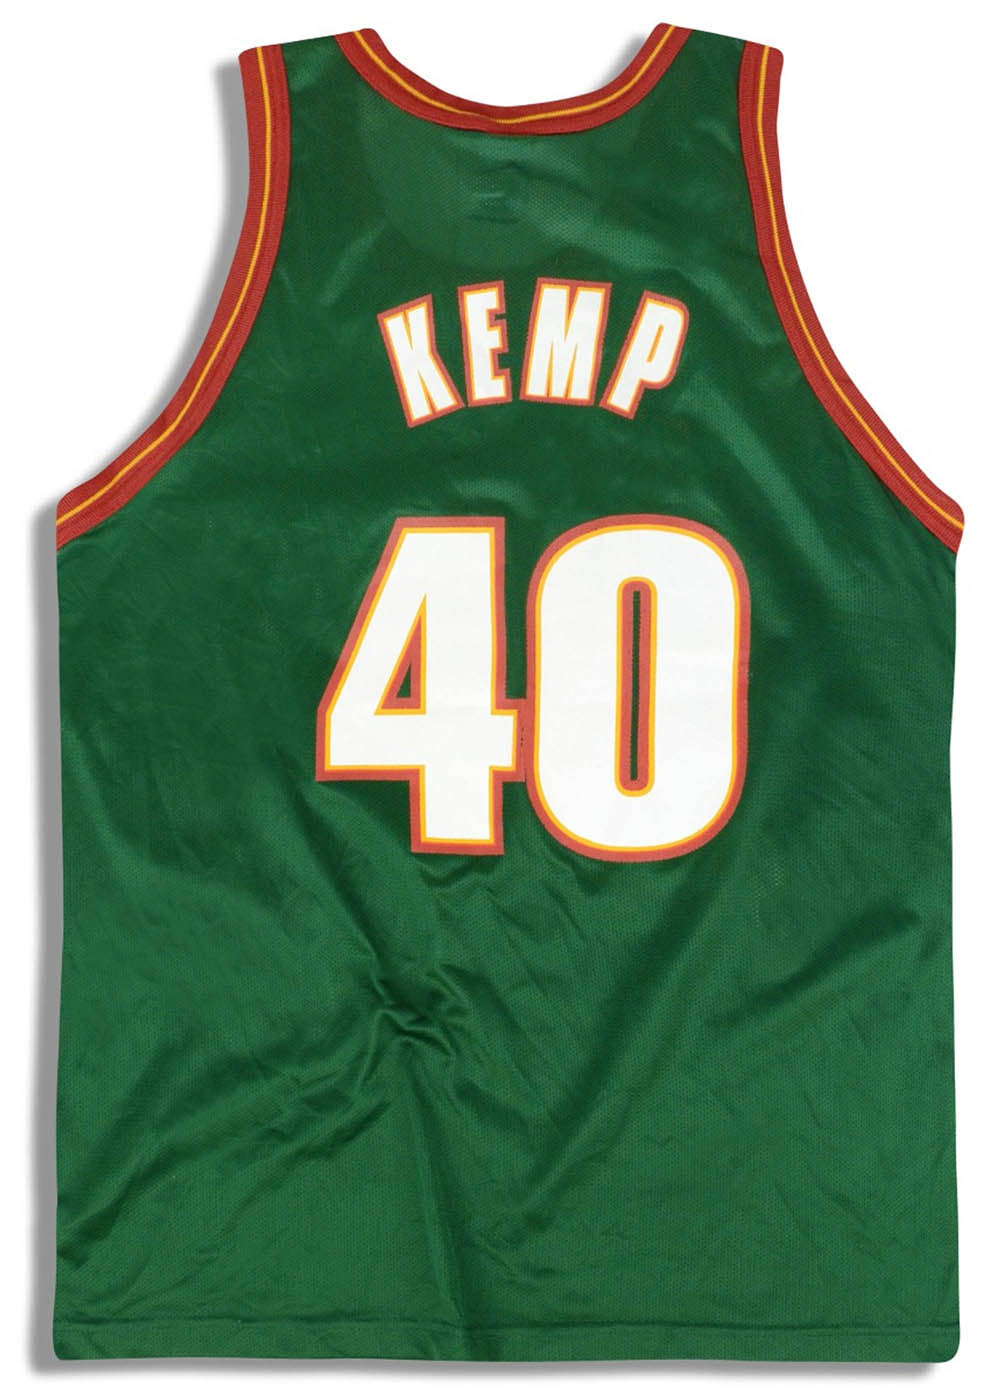 1997-99 CLEVELAND CAVALIERS KEMP #4 CHAMPION JERSEY (AWAY) Y